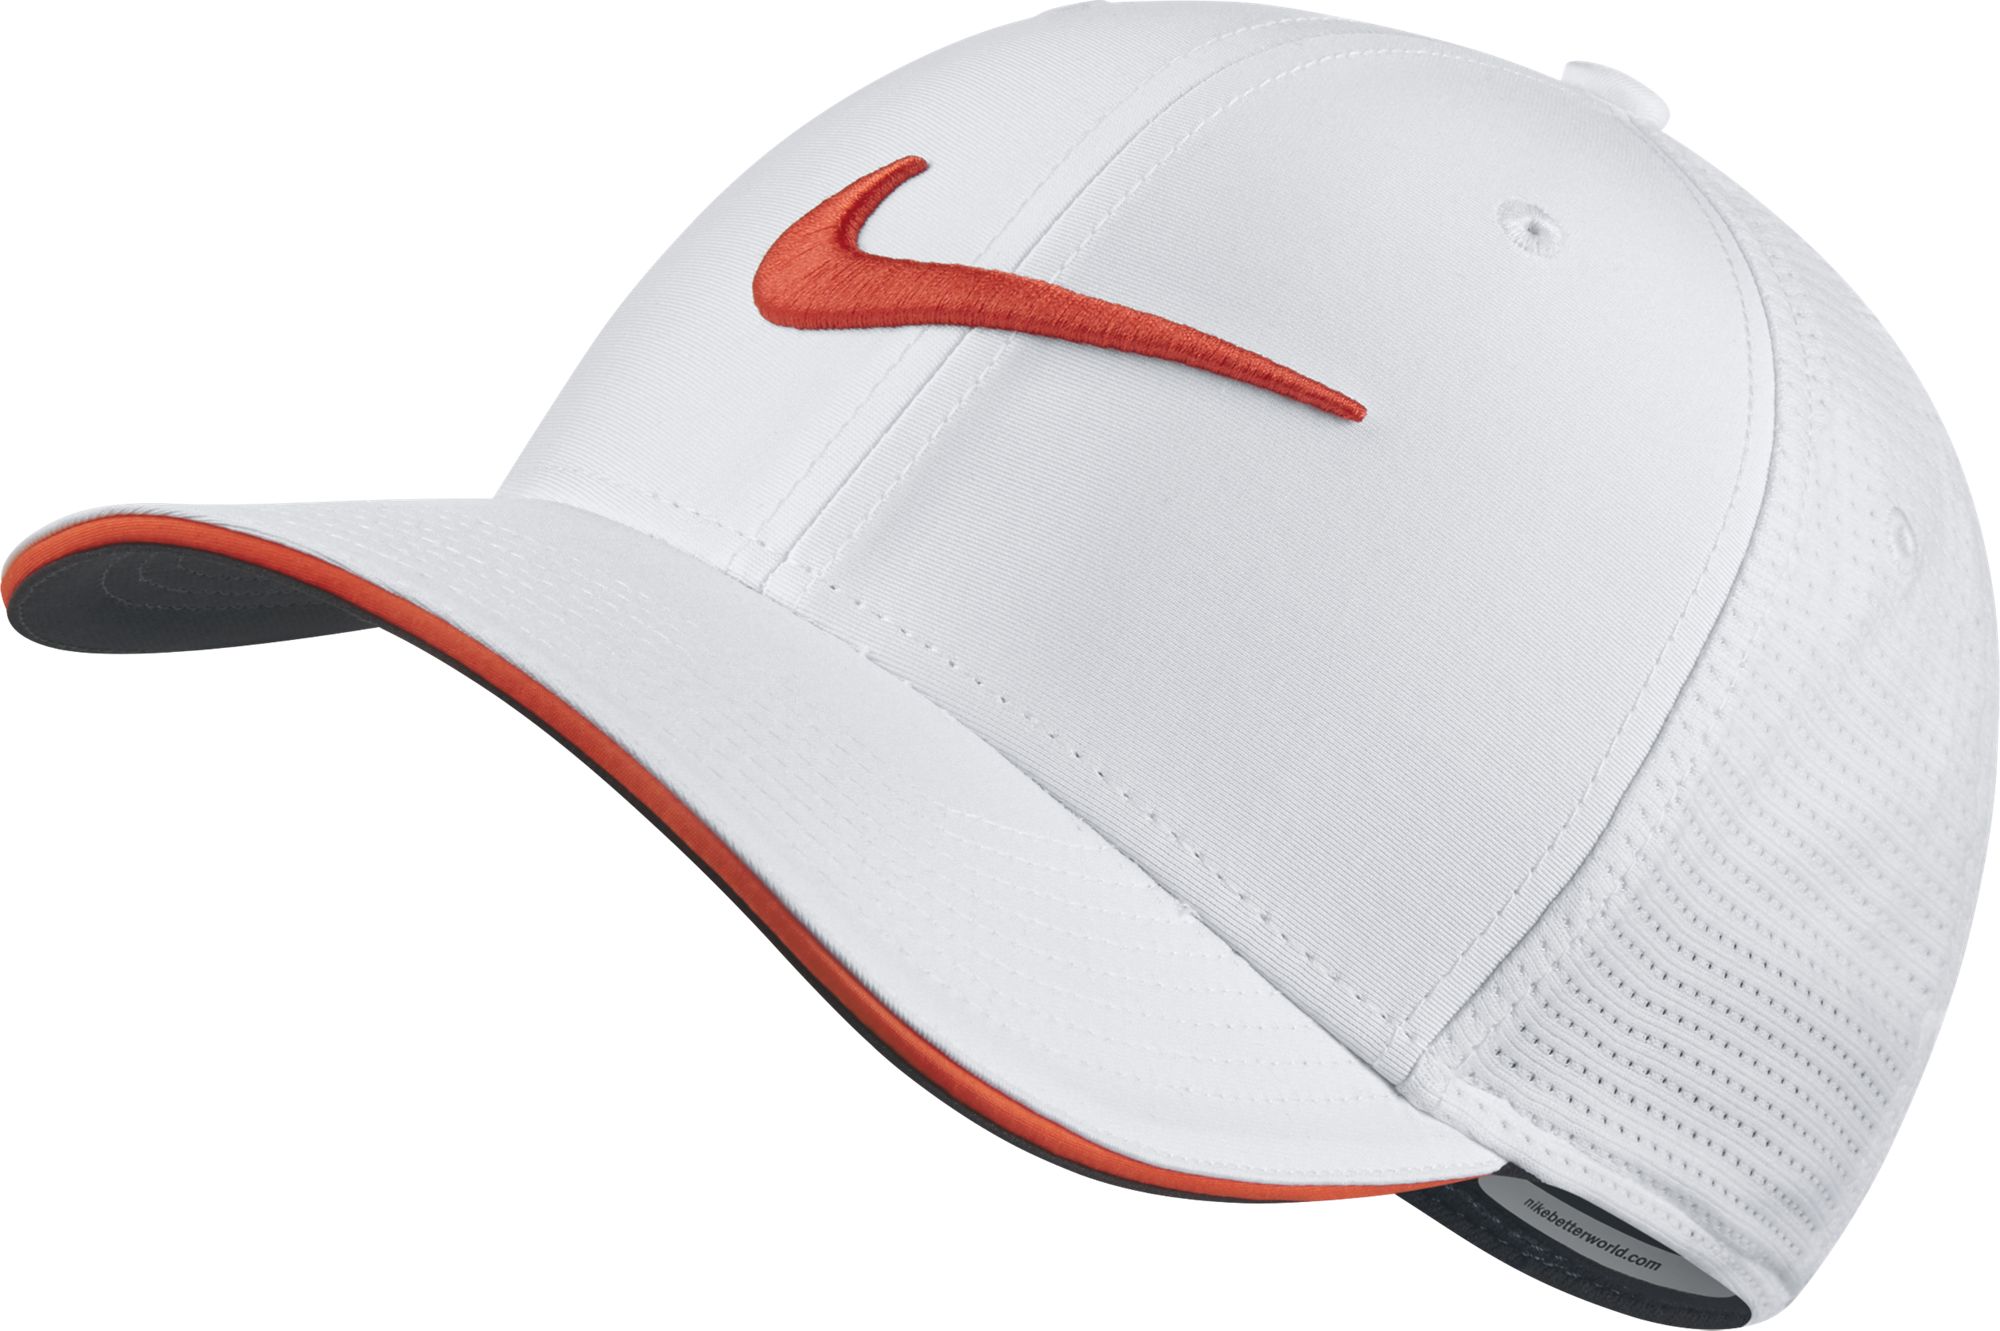 New 2017 Nike Golf Classic 99 Fitted Mesh Golf Hat COLOR: Wht/Orange SIZE: S/M | eBay